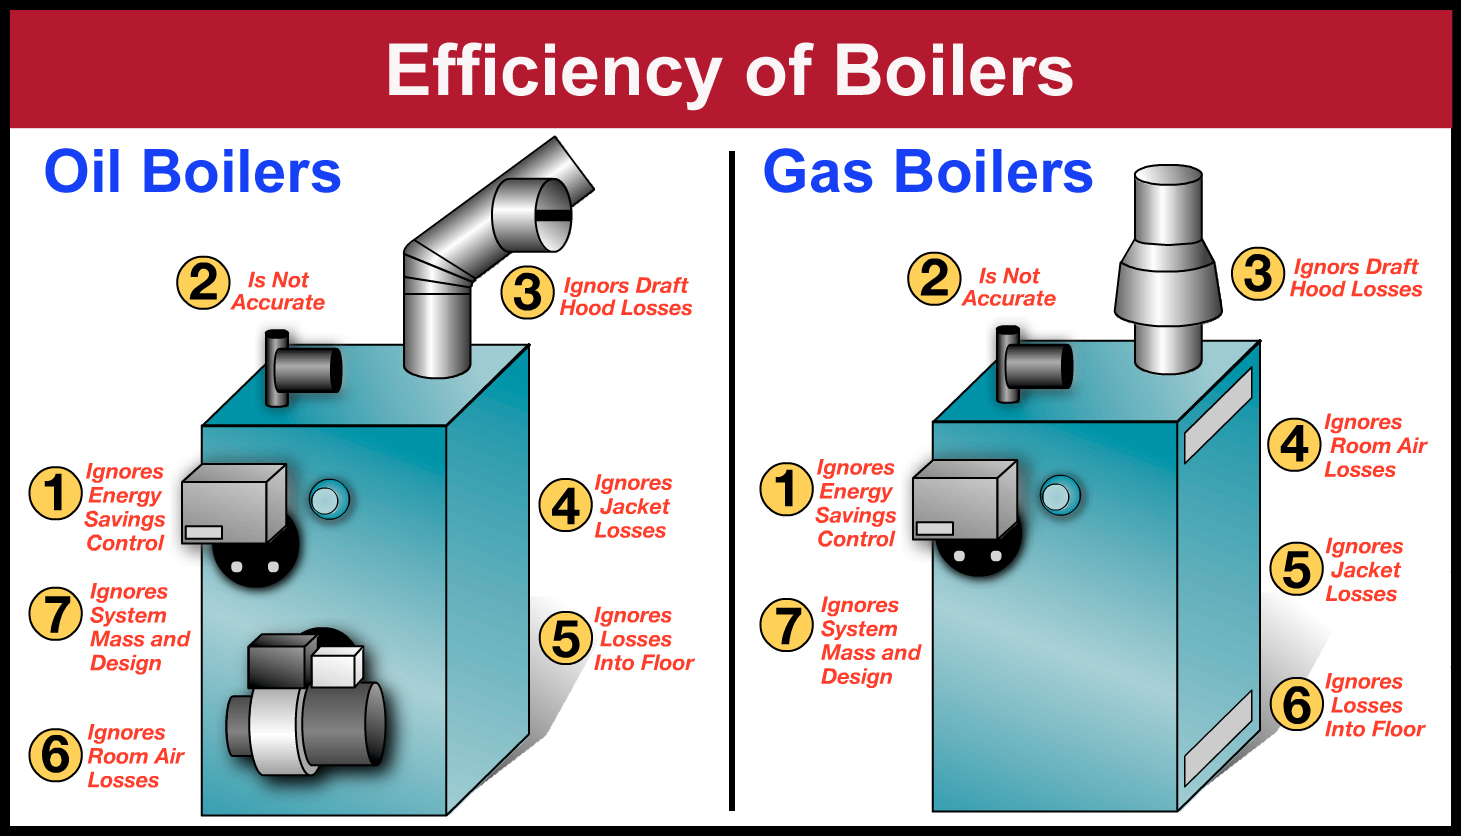 How to identify boiler savings using AFUE